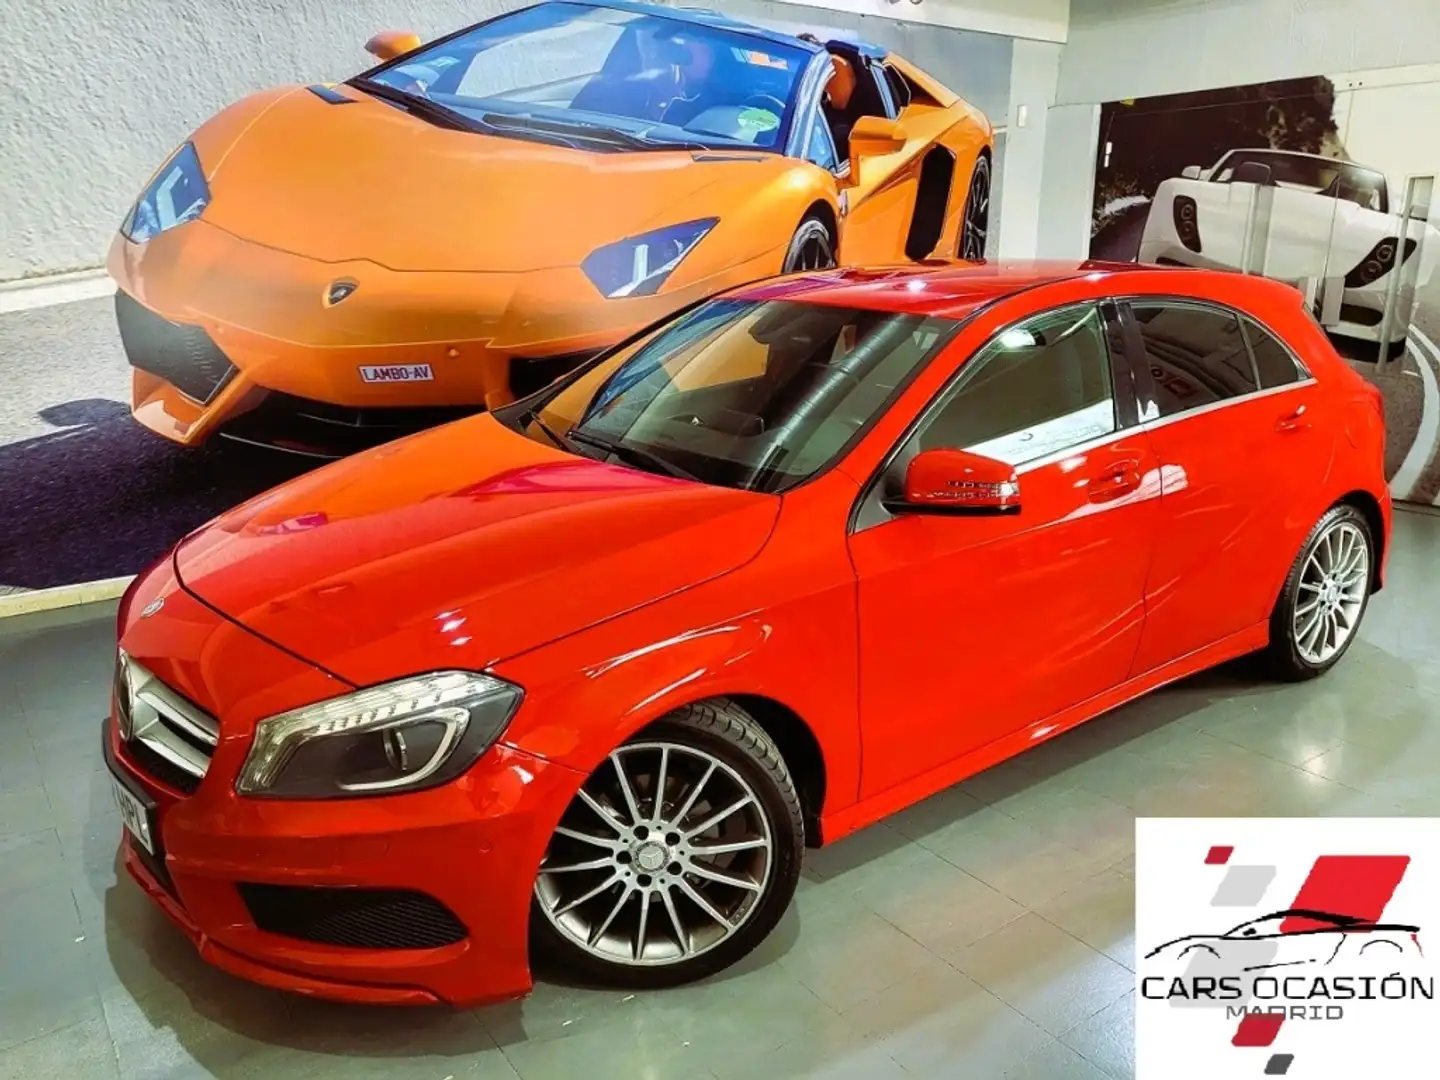 Mercedes-Benz A 180 180CDI BE AMG Line 7G-DCT Rojo - 1